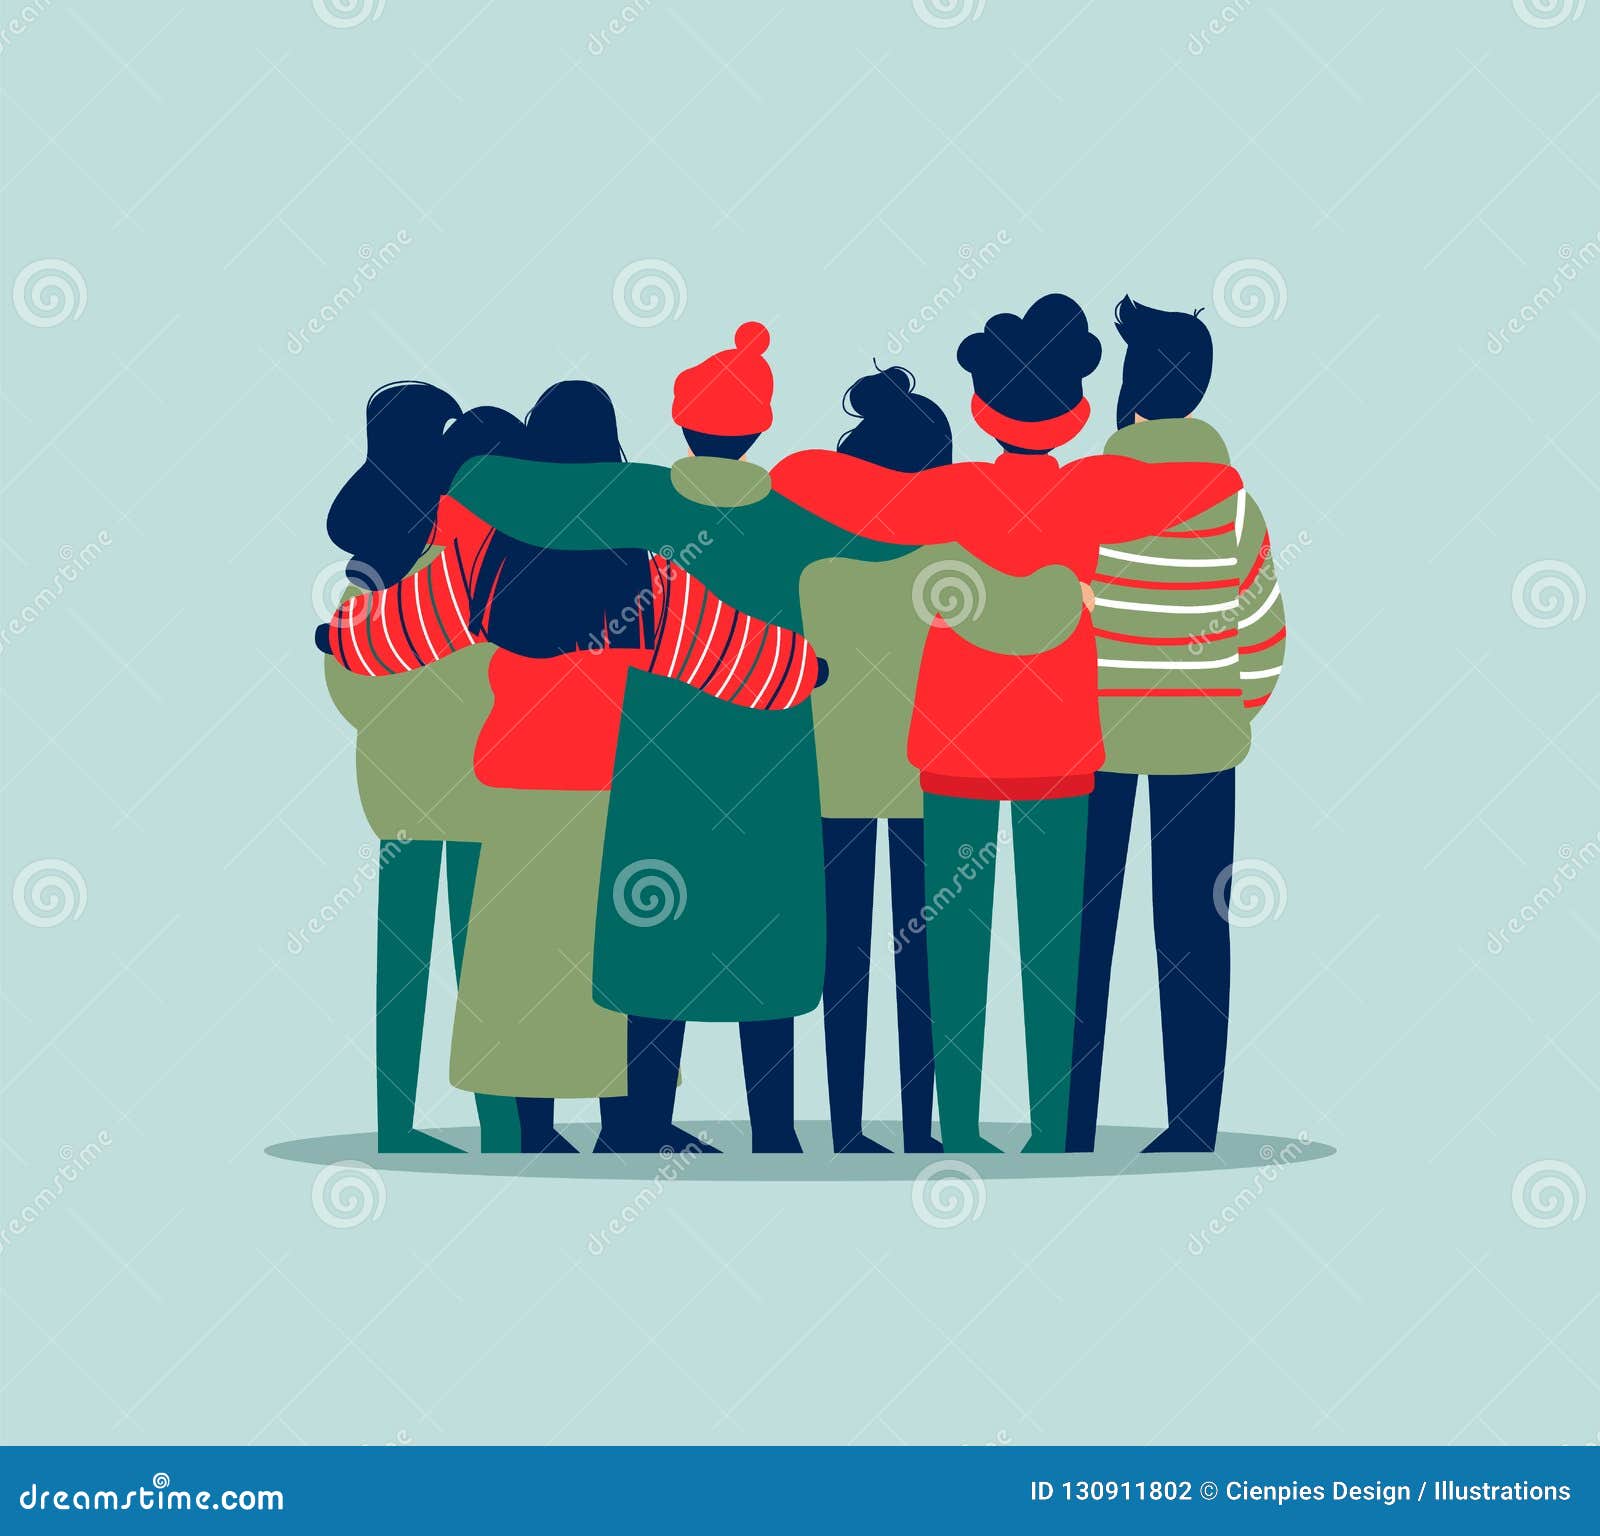 people friend group hug in winter holiday clothes